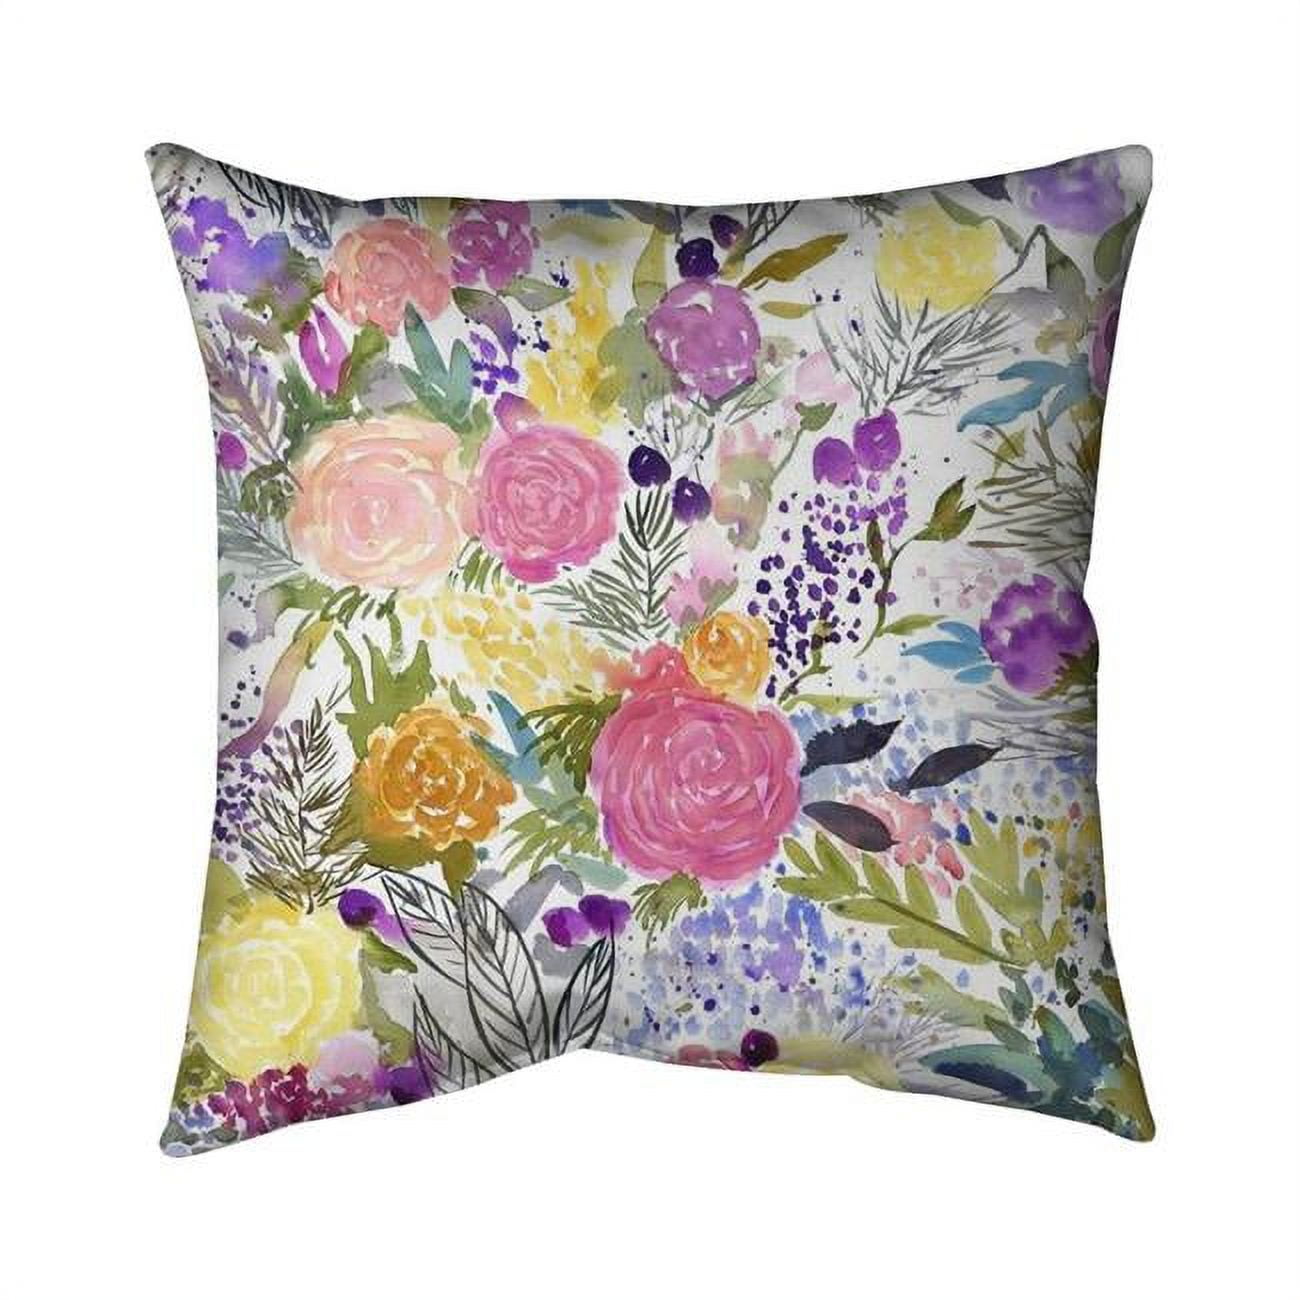 Fondo 20 x 20 in. Bundle of Flowers-Double Sided Print Outdoor Pillow Cover